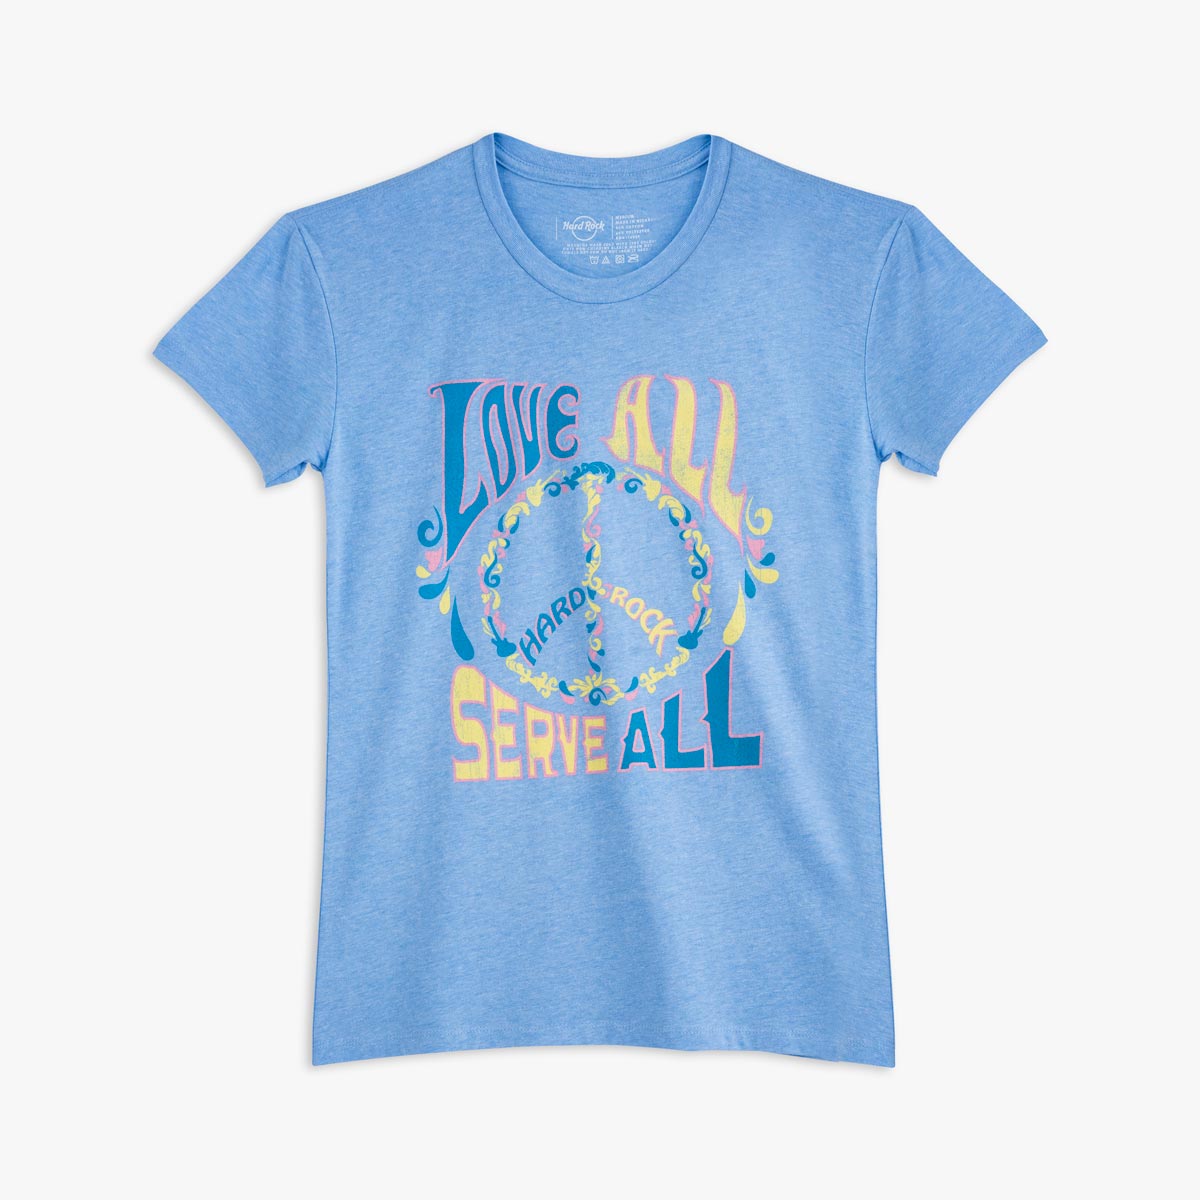 Music Festival Peace Love All Serve All Baby Doll Tee in Light Blue image number 2